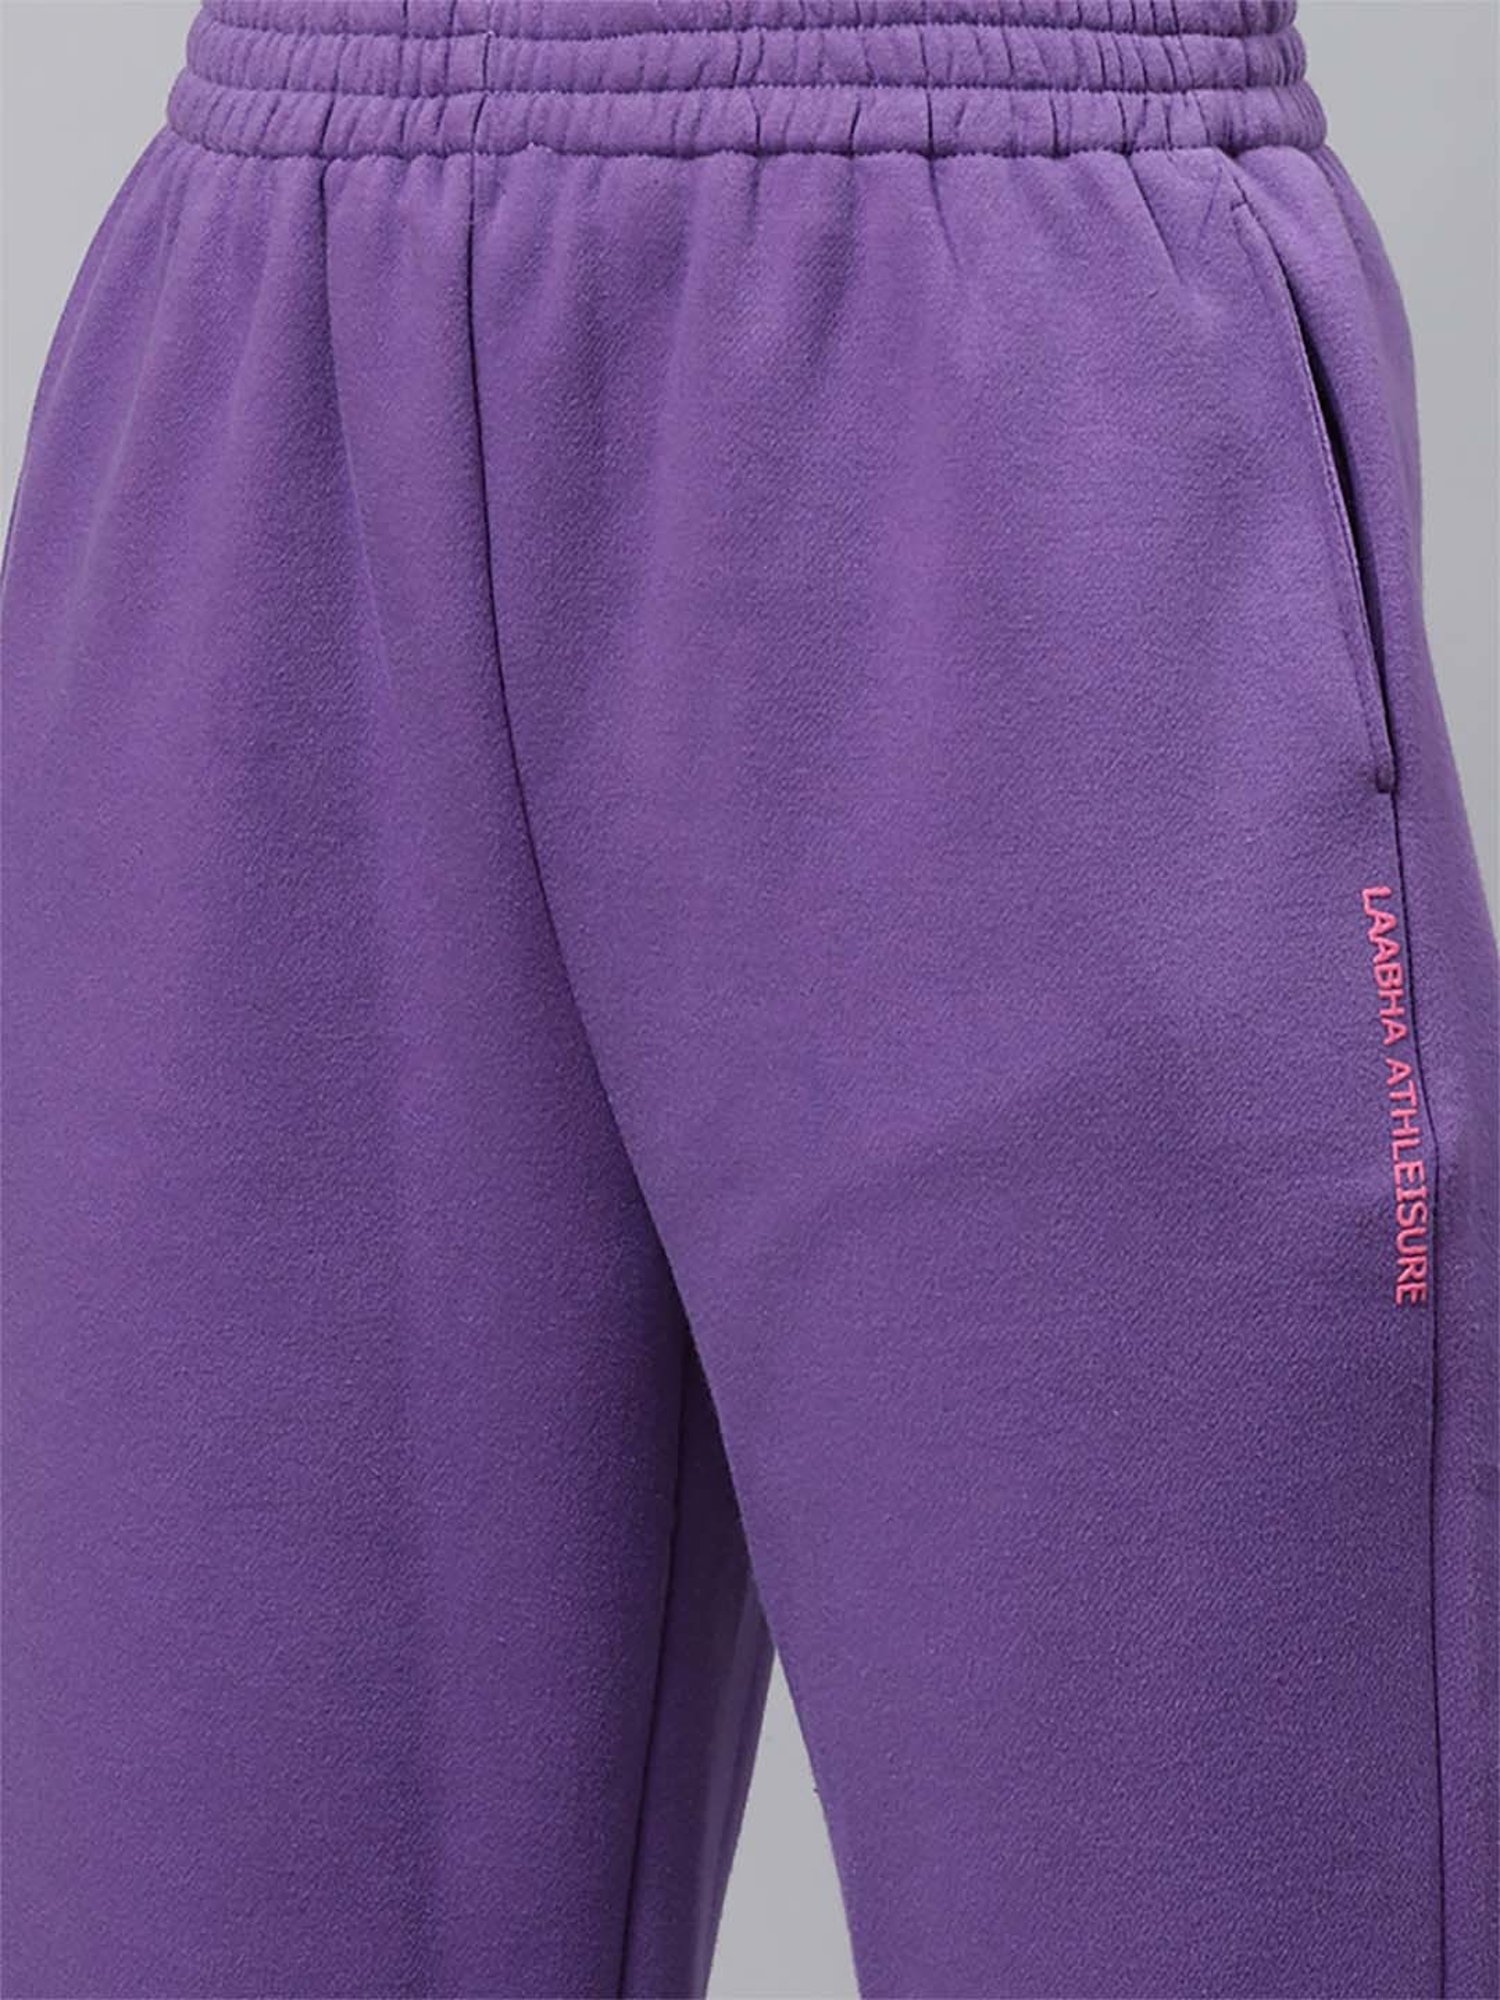 Buy Purple Tracksuits for Women by LAABHA Online